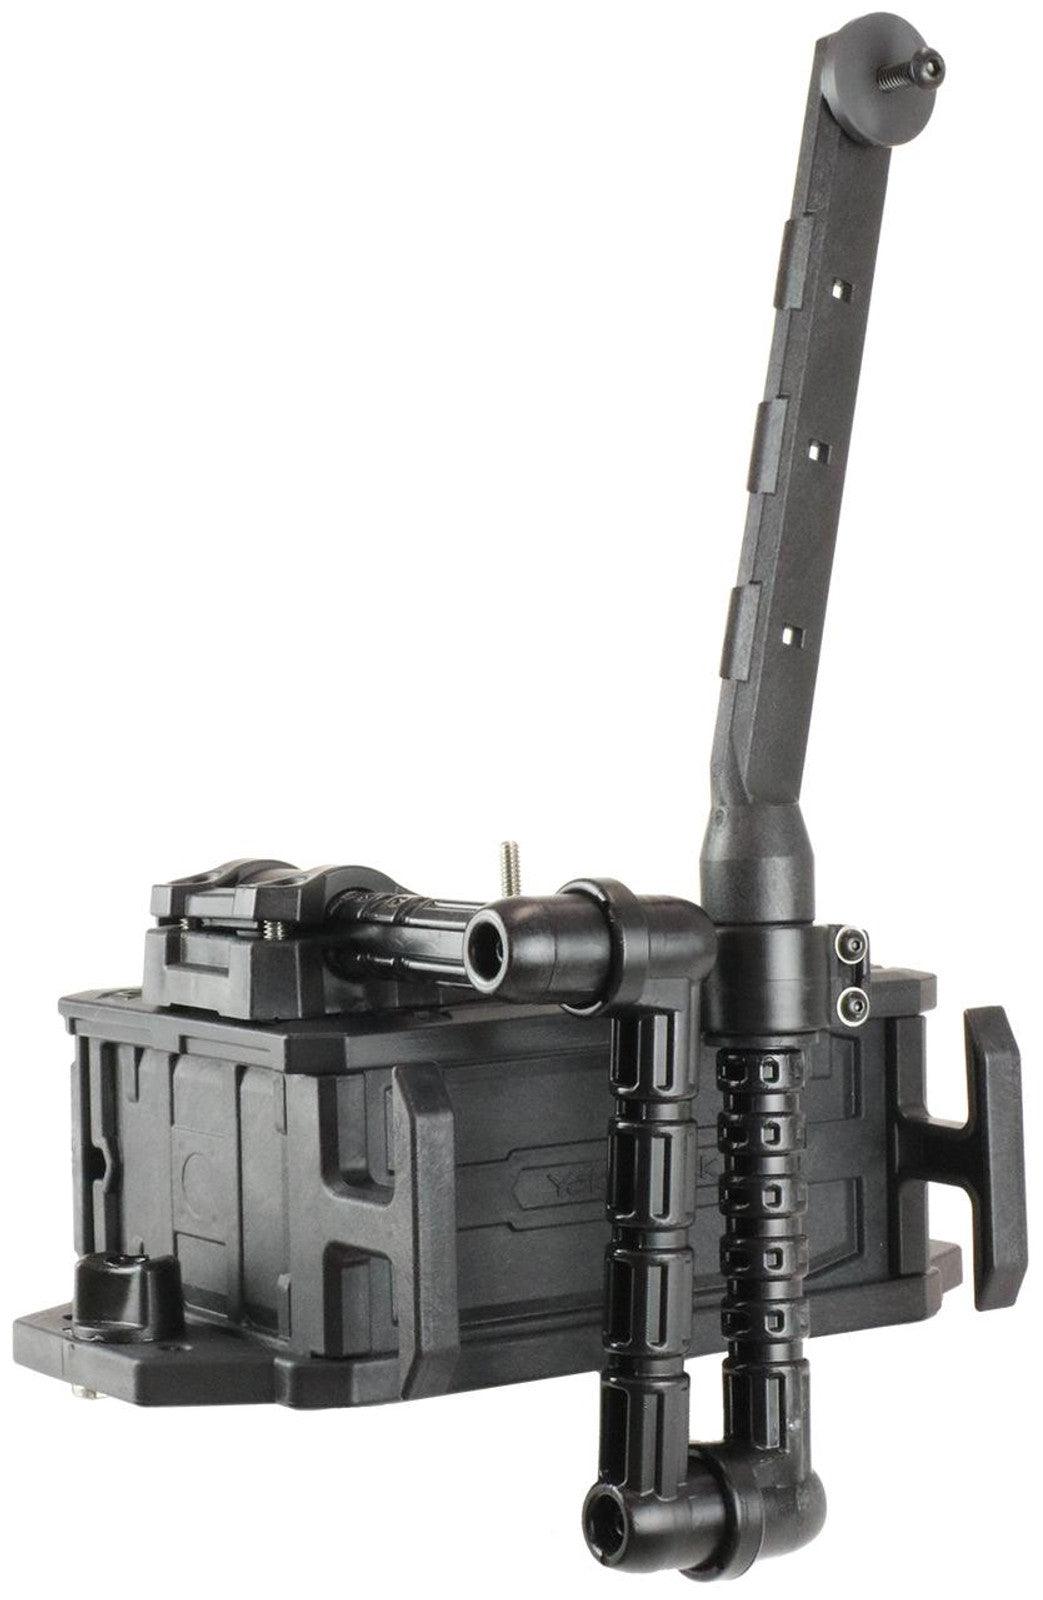 CellBlok Battery Box and SwitchBlade Transducer Arm Combo - OMTC